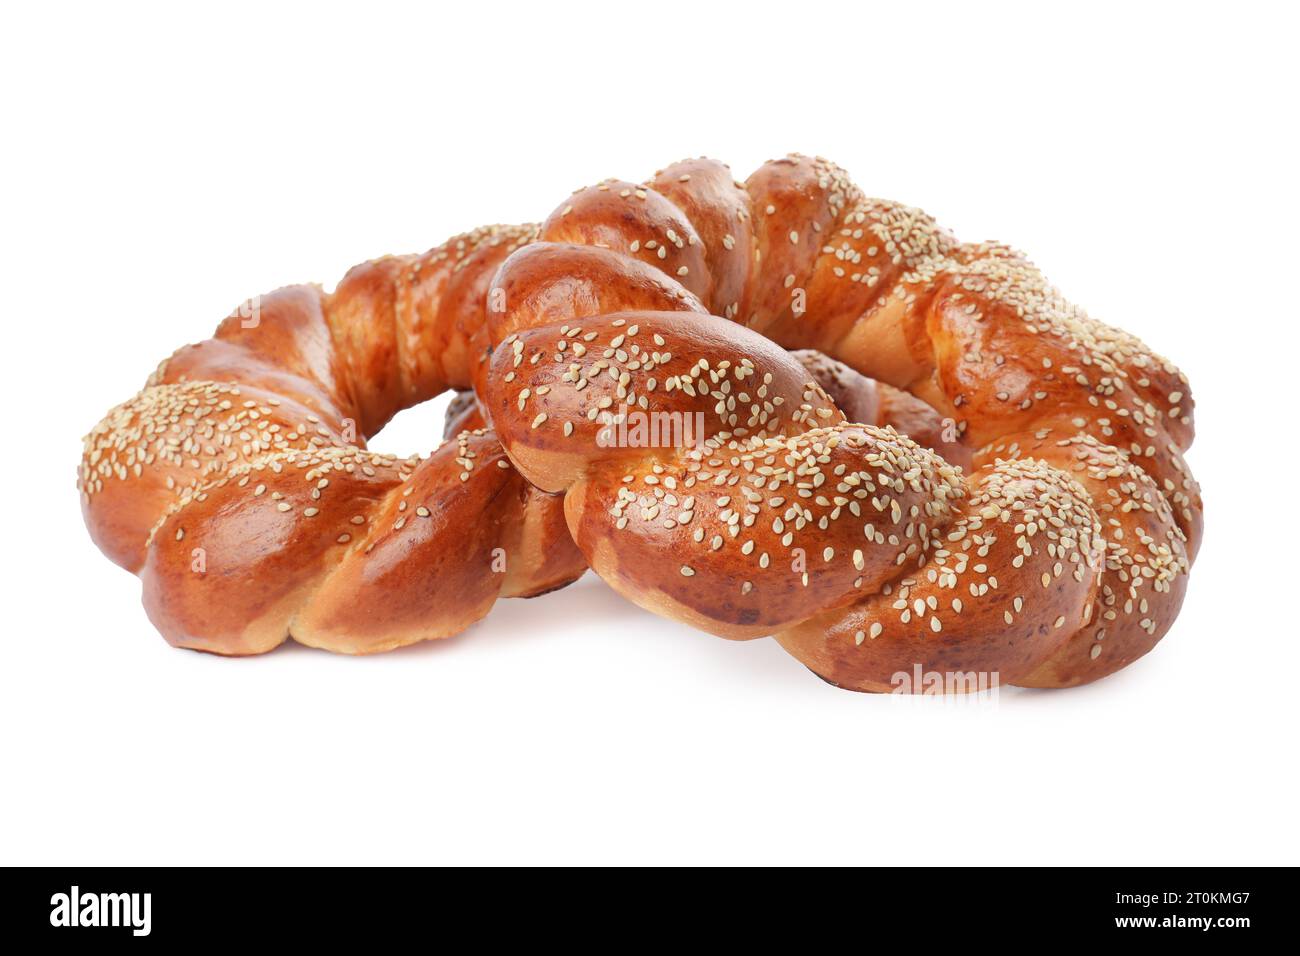 Round braided breads isolated on white. Fresh pastries Stock Photo